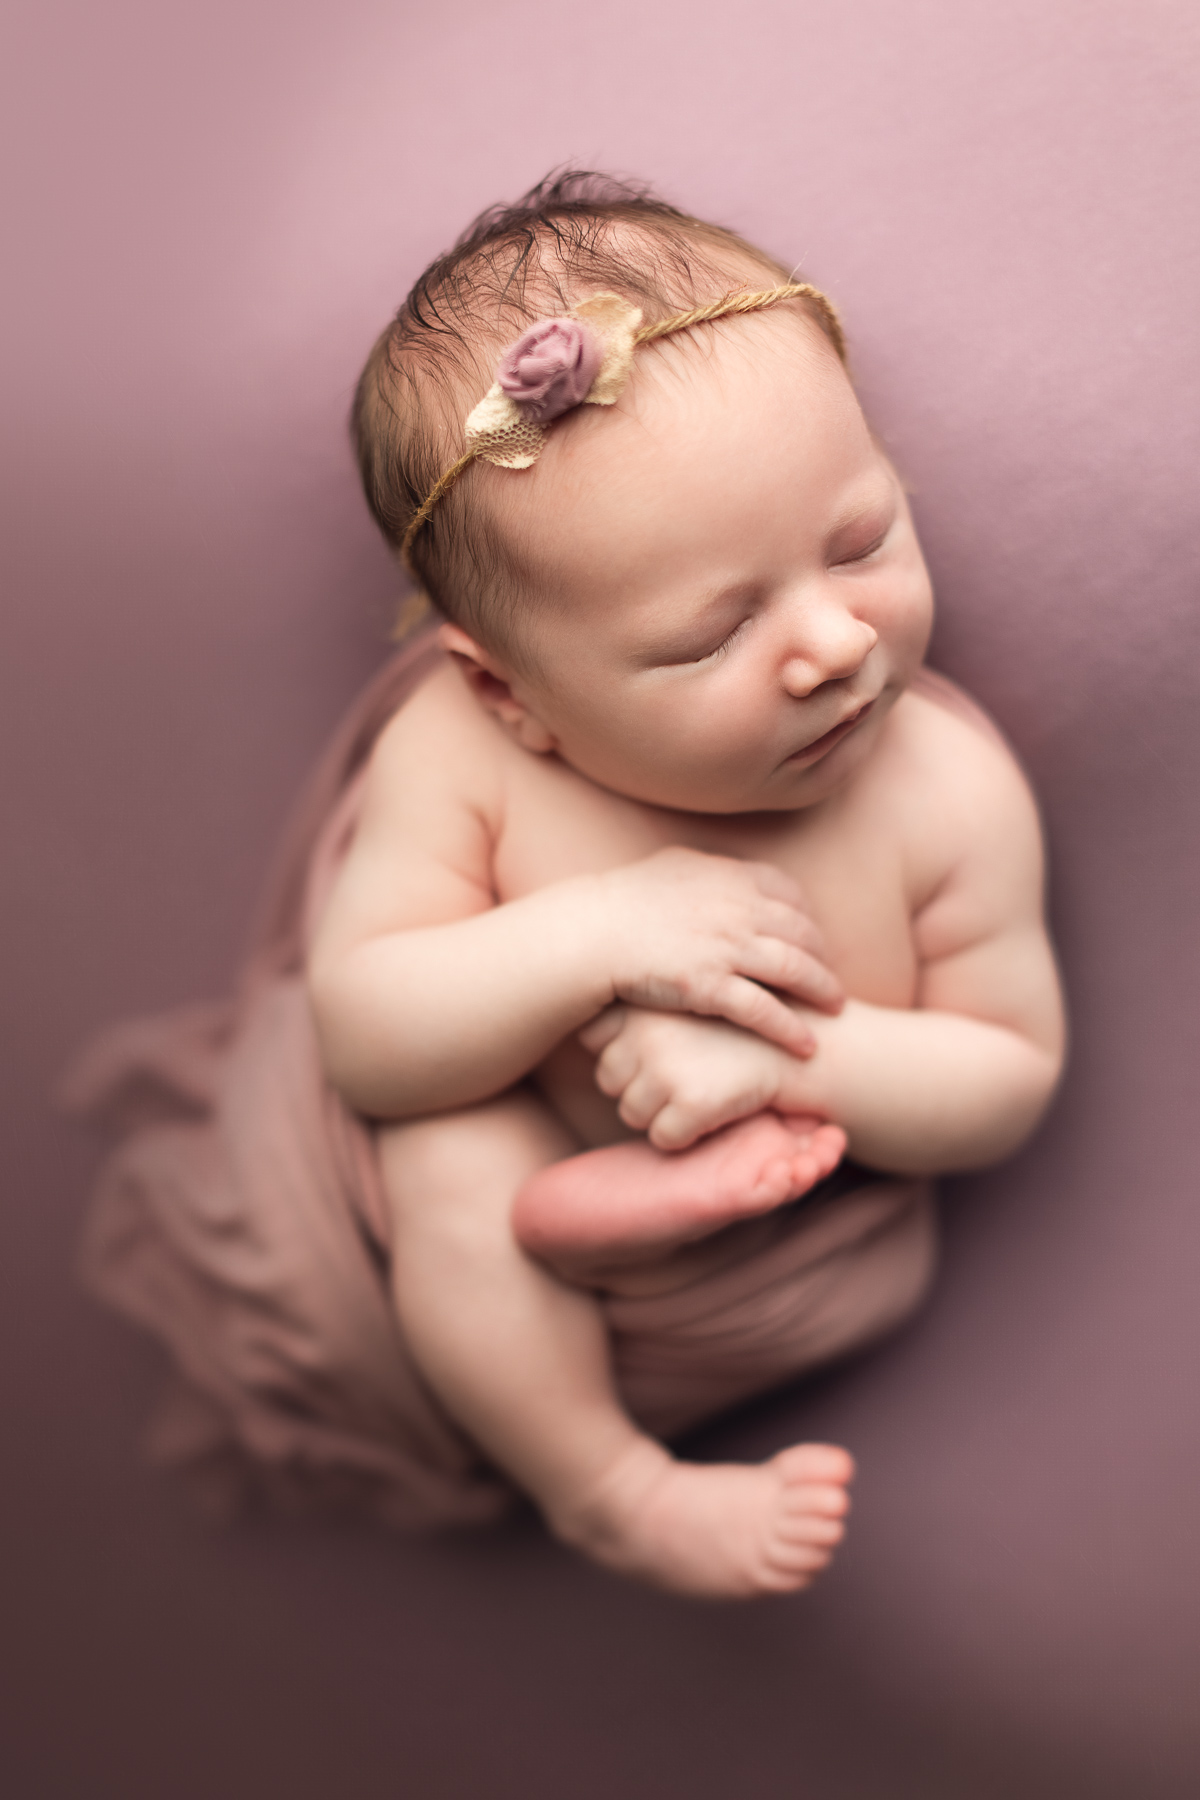 newborn photography classic package sample - baby girl with pink background and headband